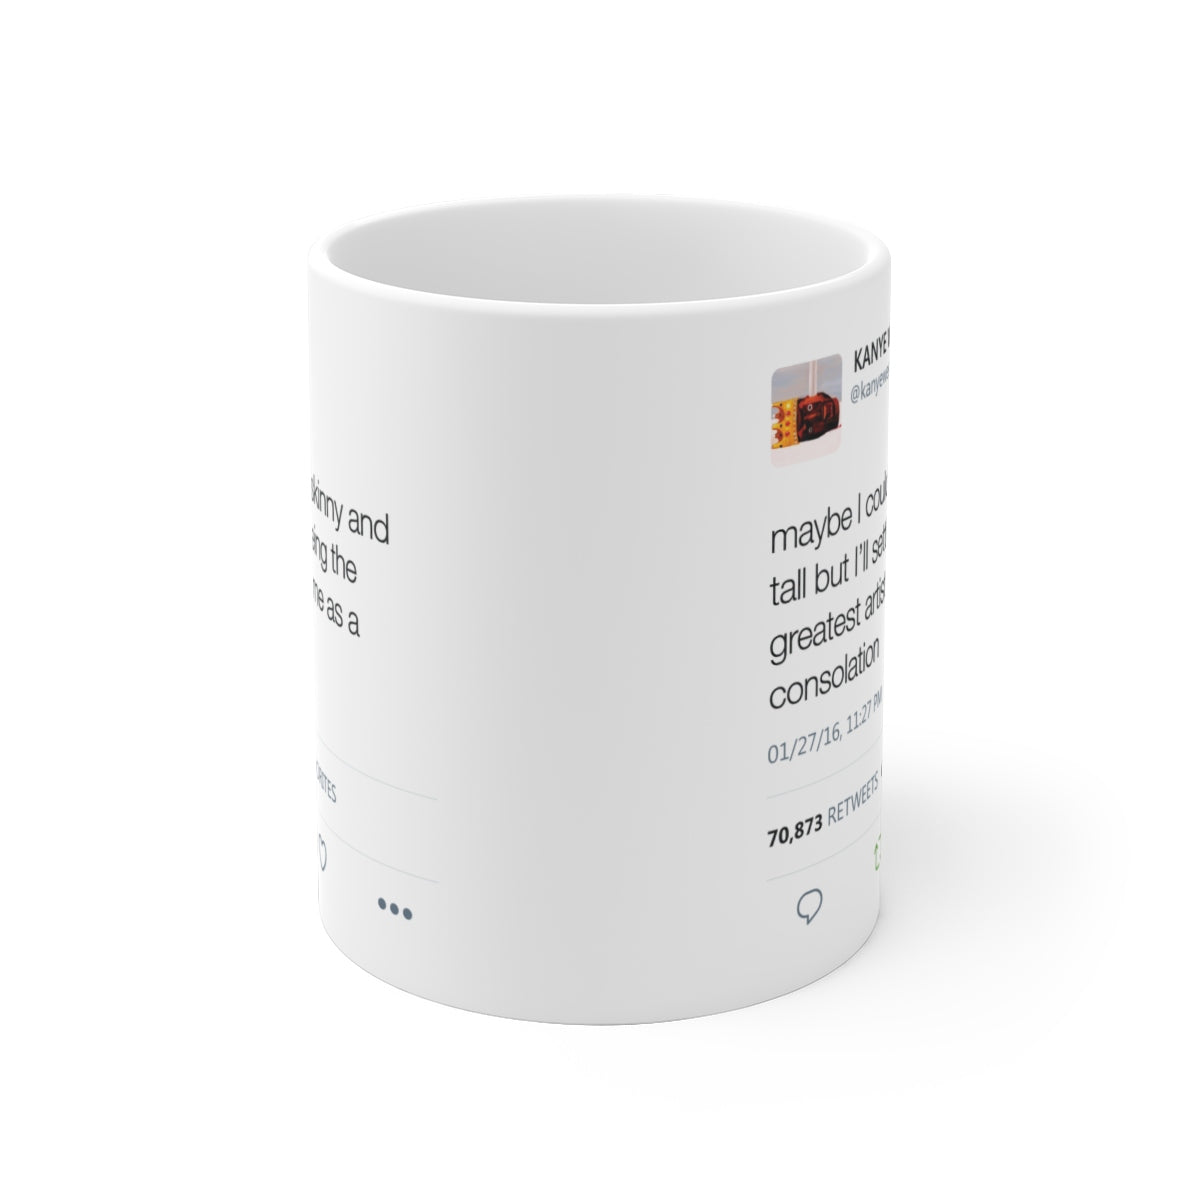 Maybe I couldn't be skinny and tall but I'll settle for being the greatest artist Kanye Tweet Mug-Archethype